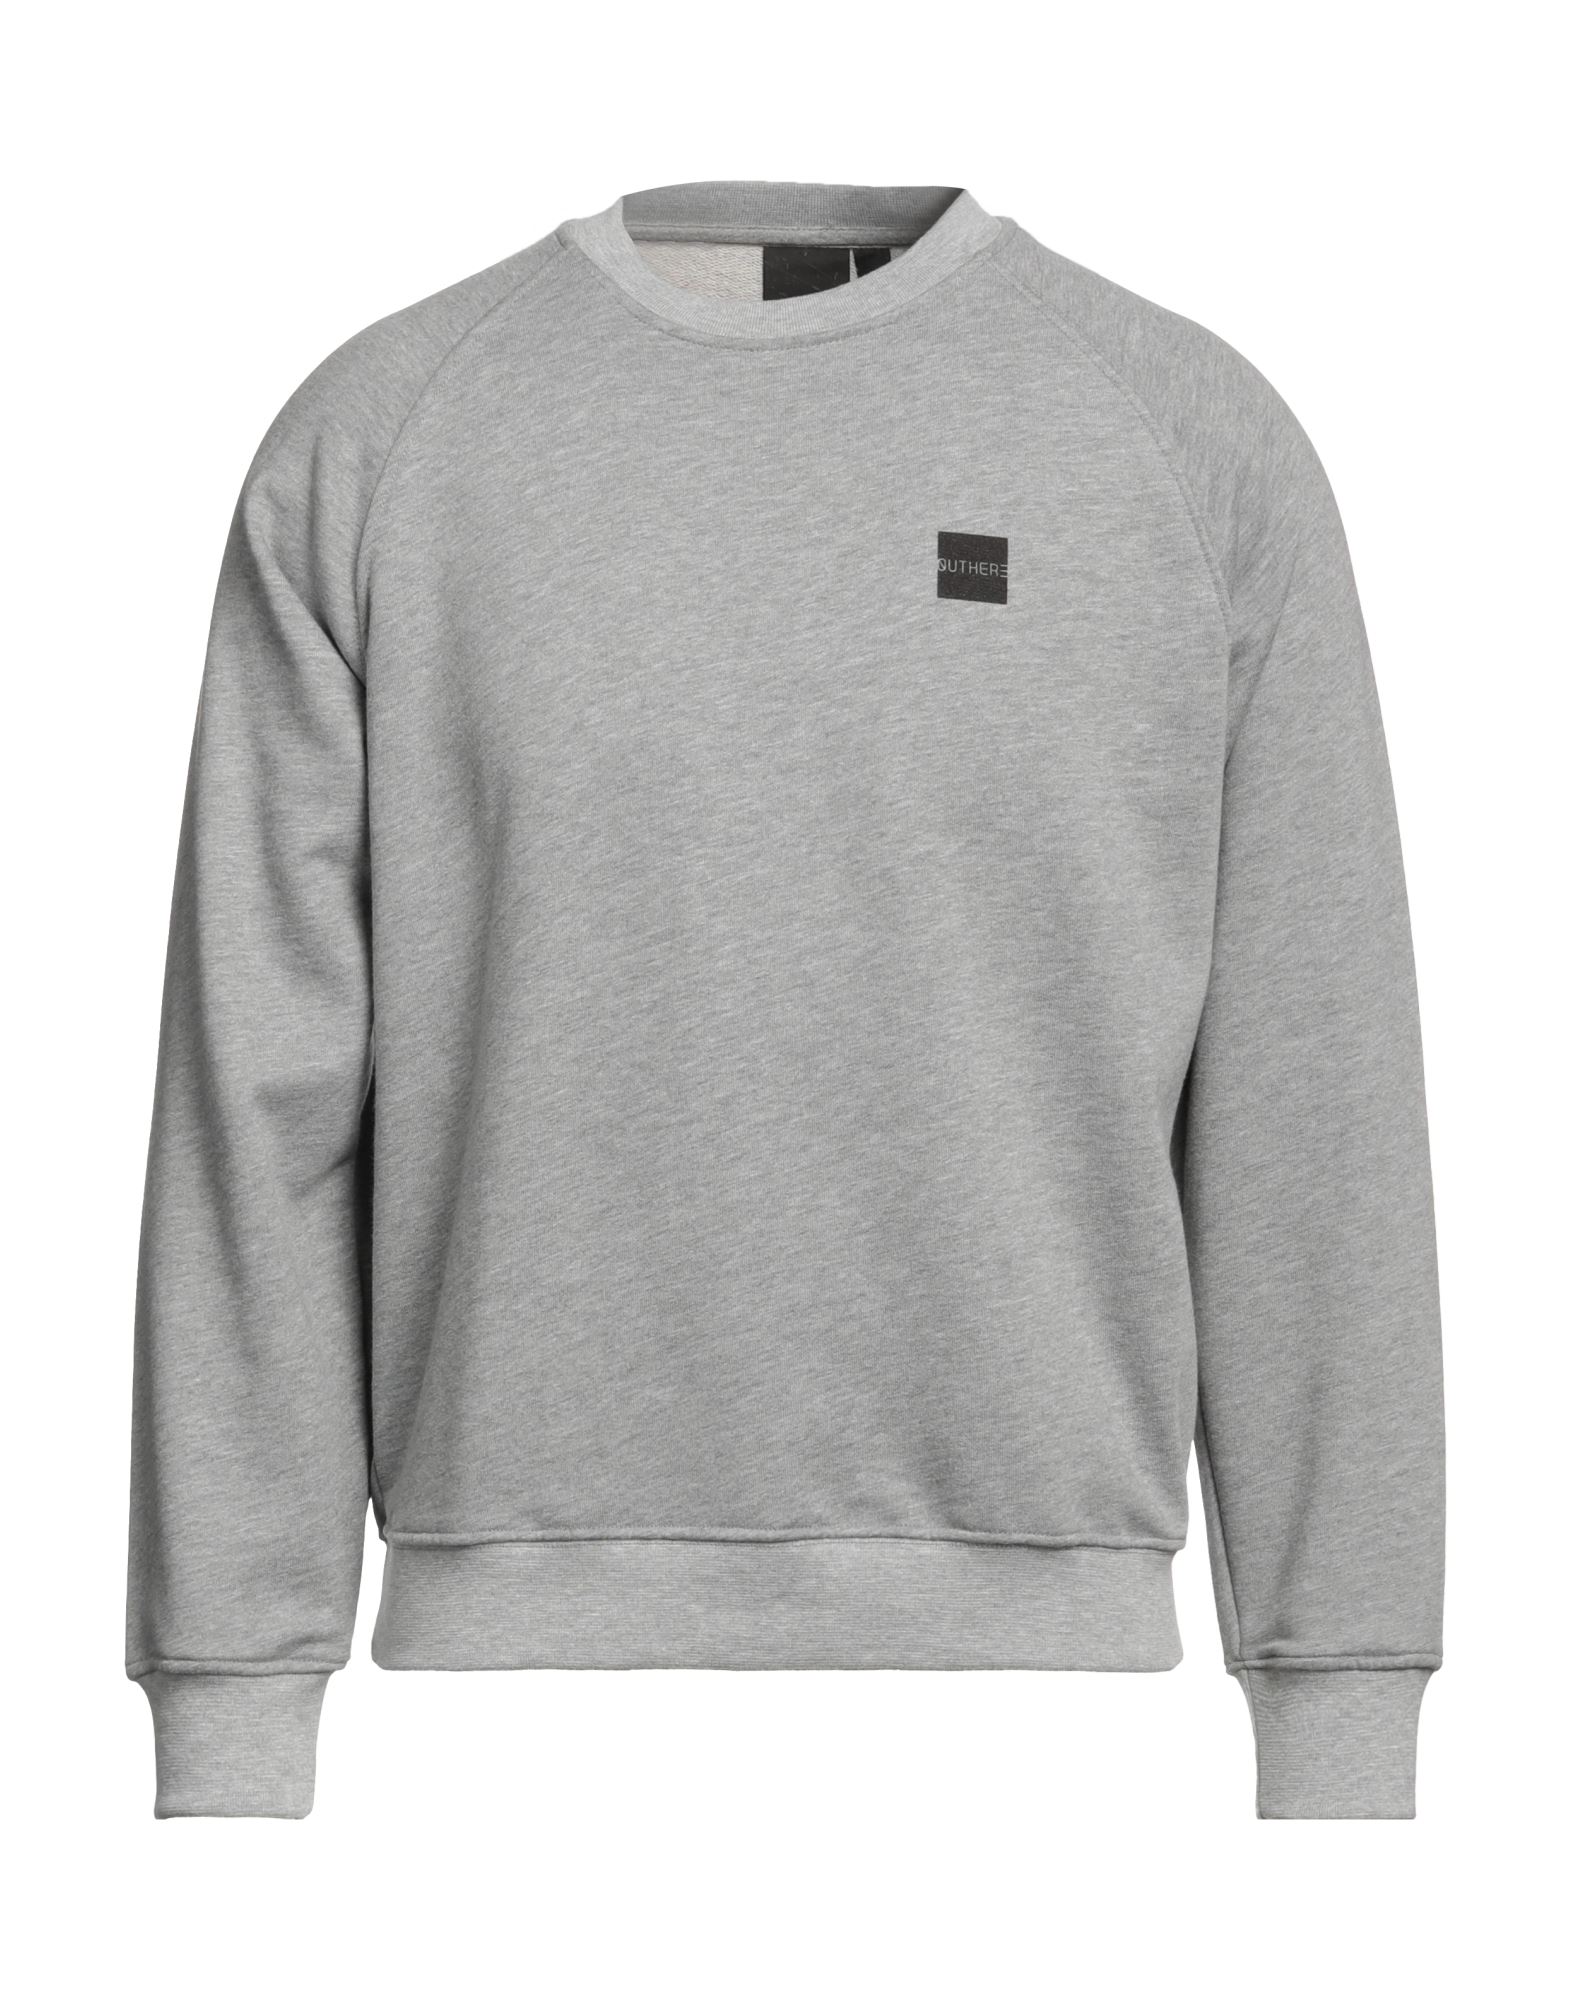 Outhere Sweatshirts In Light Grey